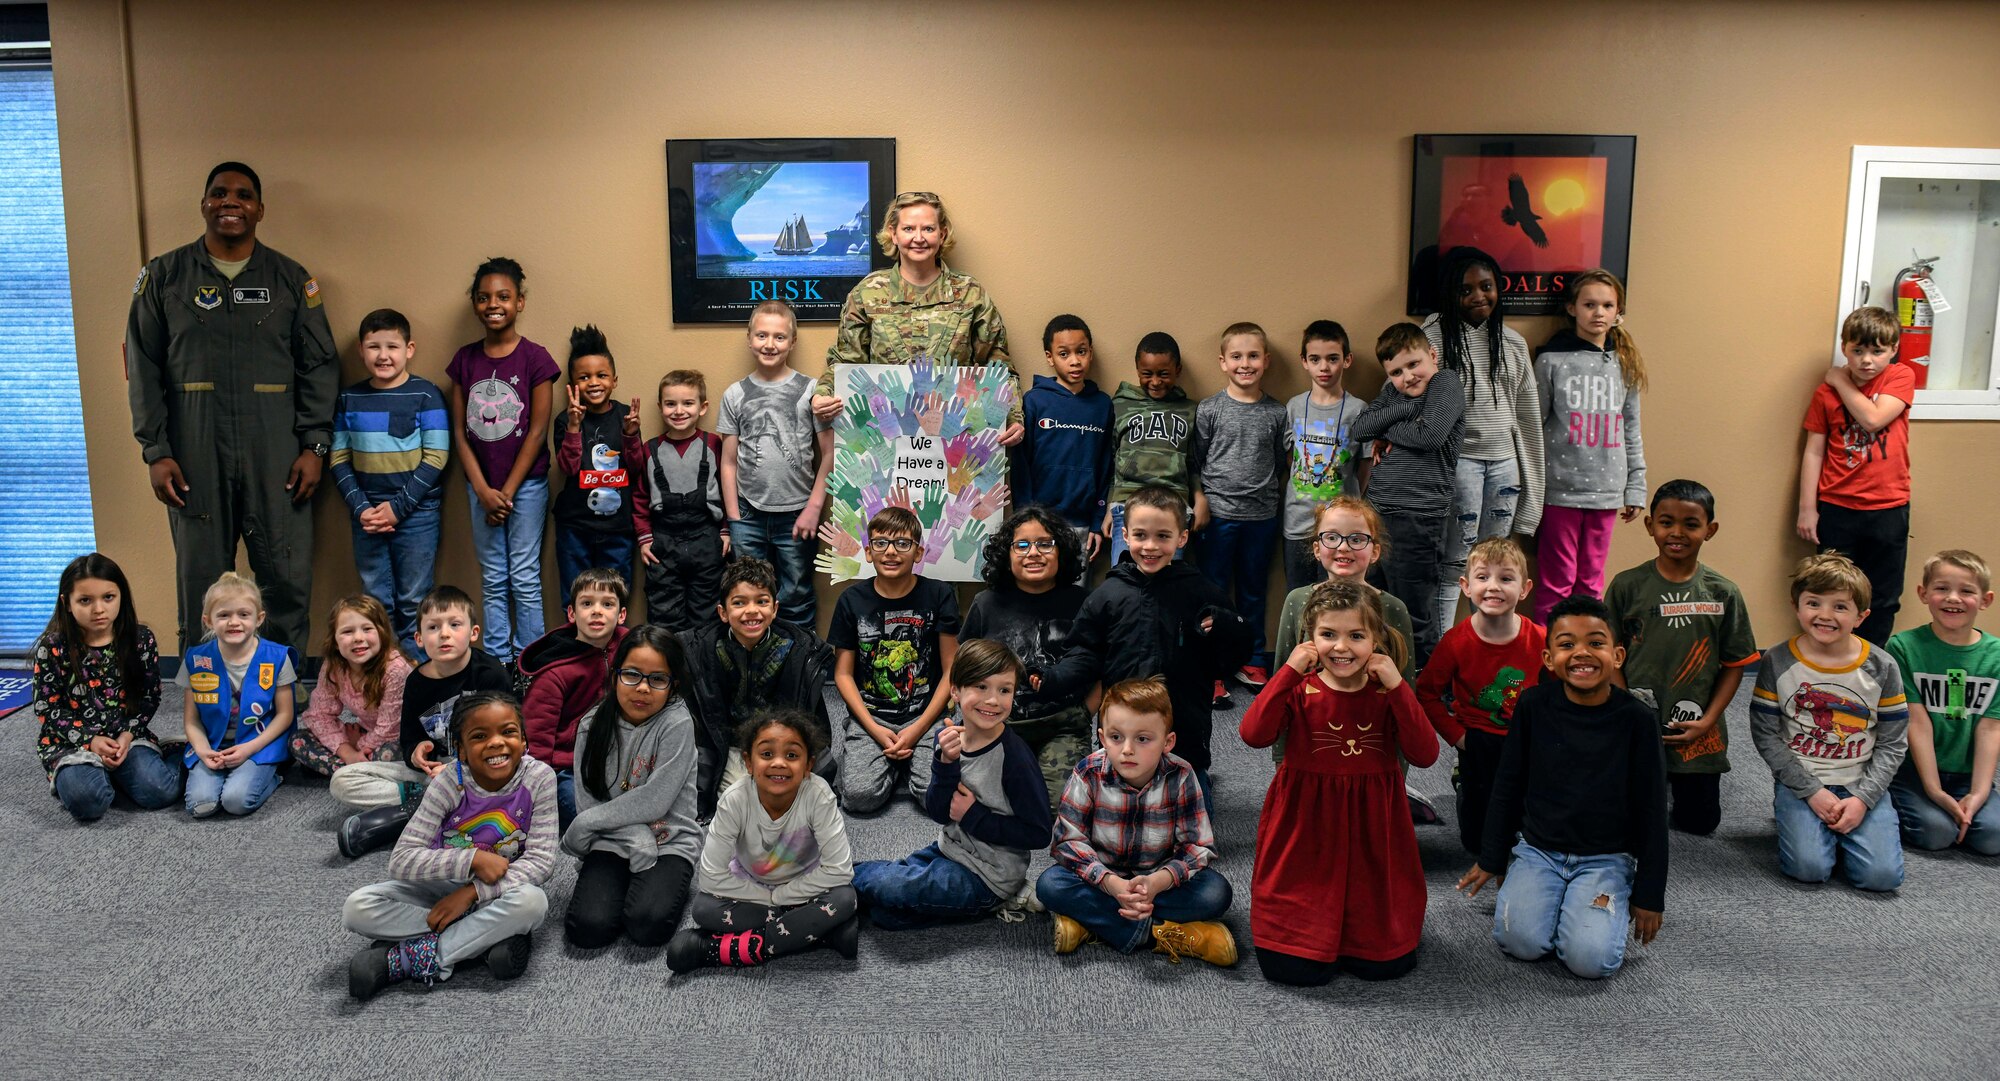 Col. Jennifer Reeves, 341st Missile Wing commander, and Capt. Cornelius Hall, 341st Operations Group standards and evaluations evaluator, pose for a group photo with children during a Black History Month event at the Youth Center Feb. 12, 2020, at Malmstrom Air Force Base, Mont.